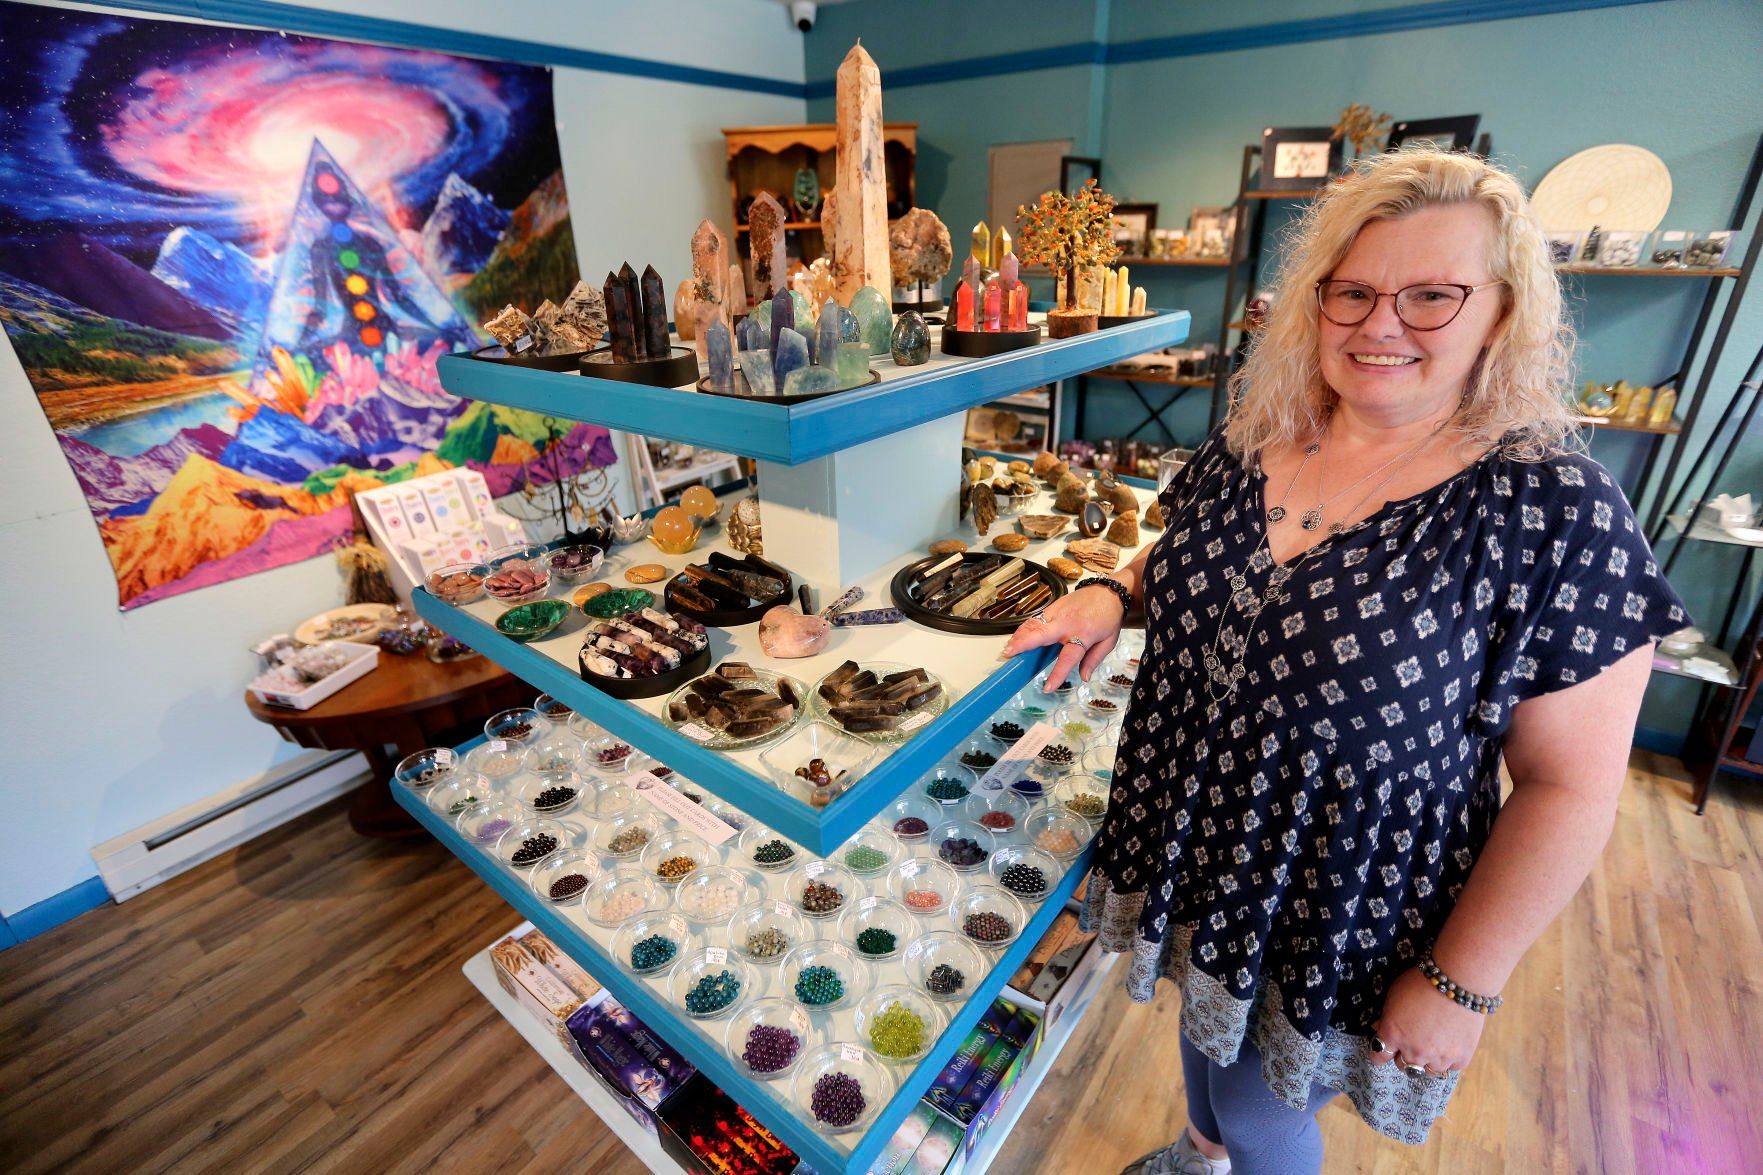 Stacy Meyer is the owner of Higher-Self Holistics in Dubuque.    PHOTO CREDIT: Dave Kettering